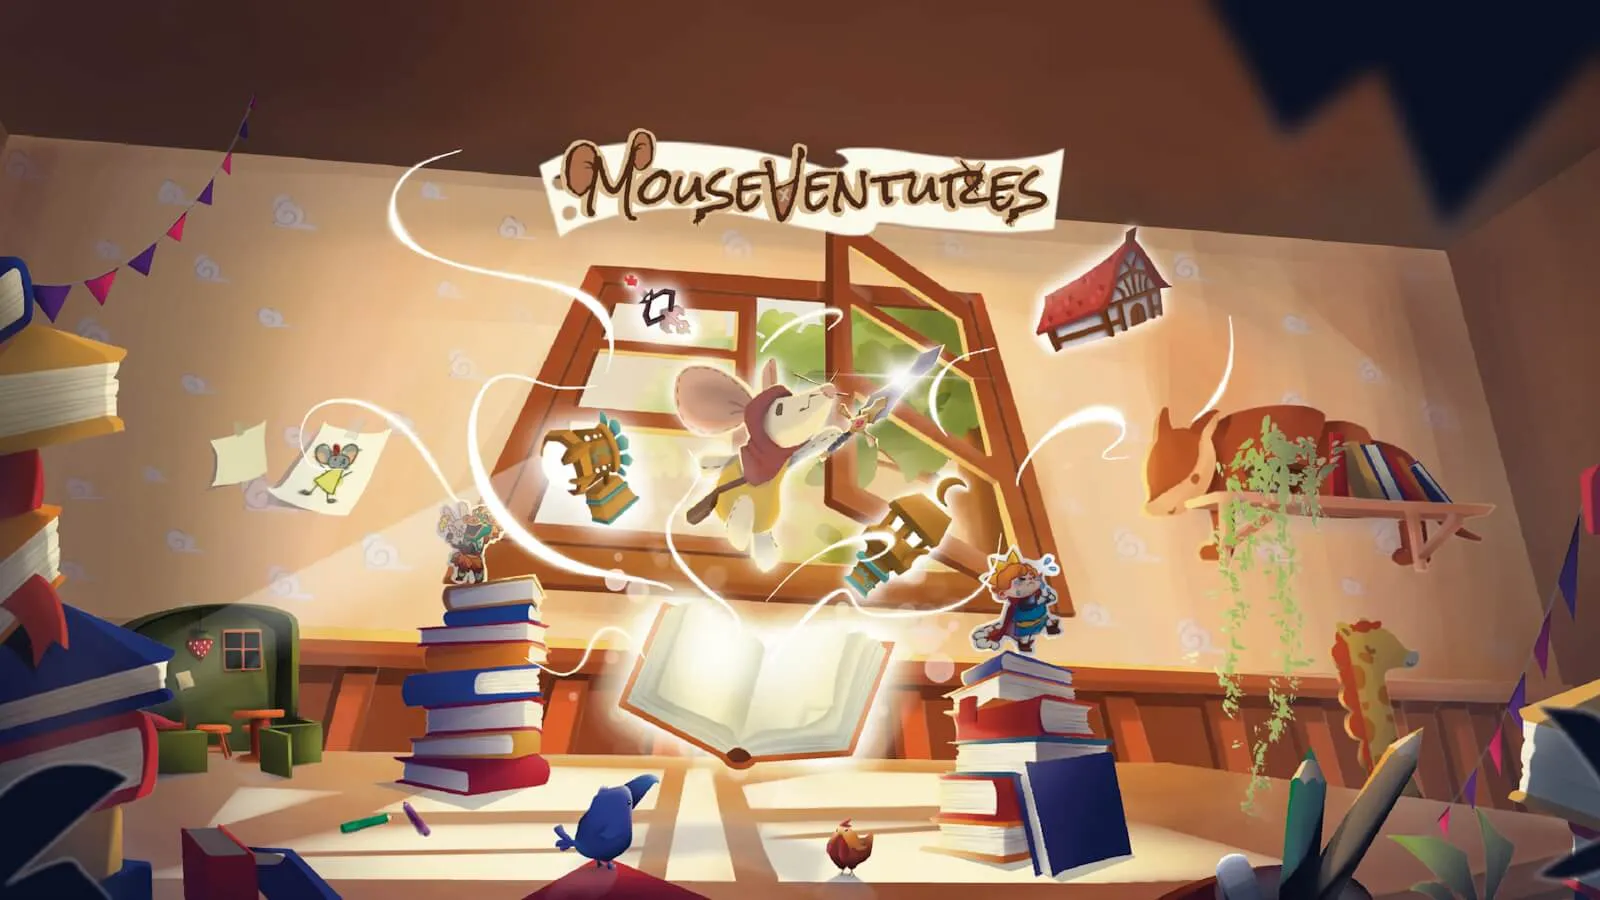 A whimsical scene featuring a mouse with a sword flying from an open book, surrounded by magical items.